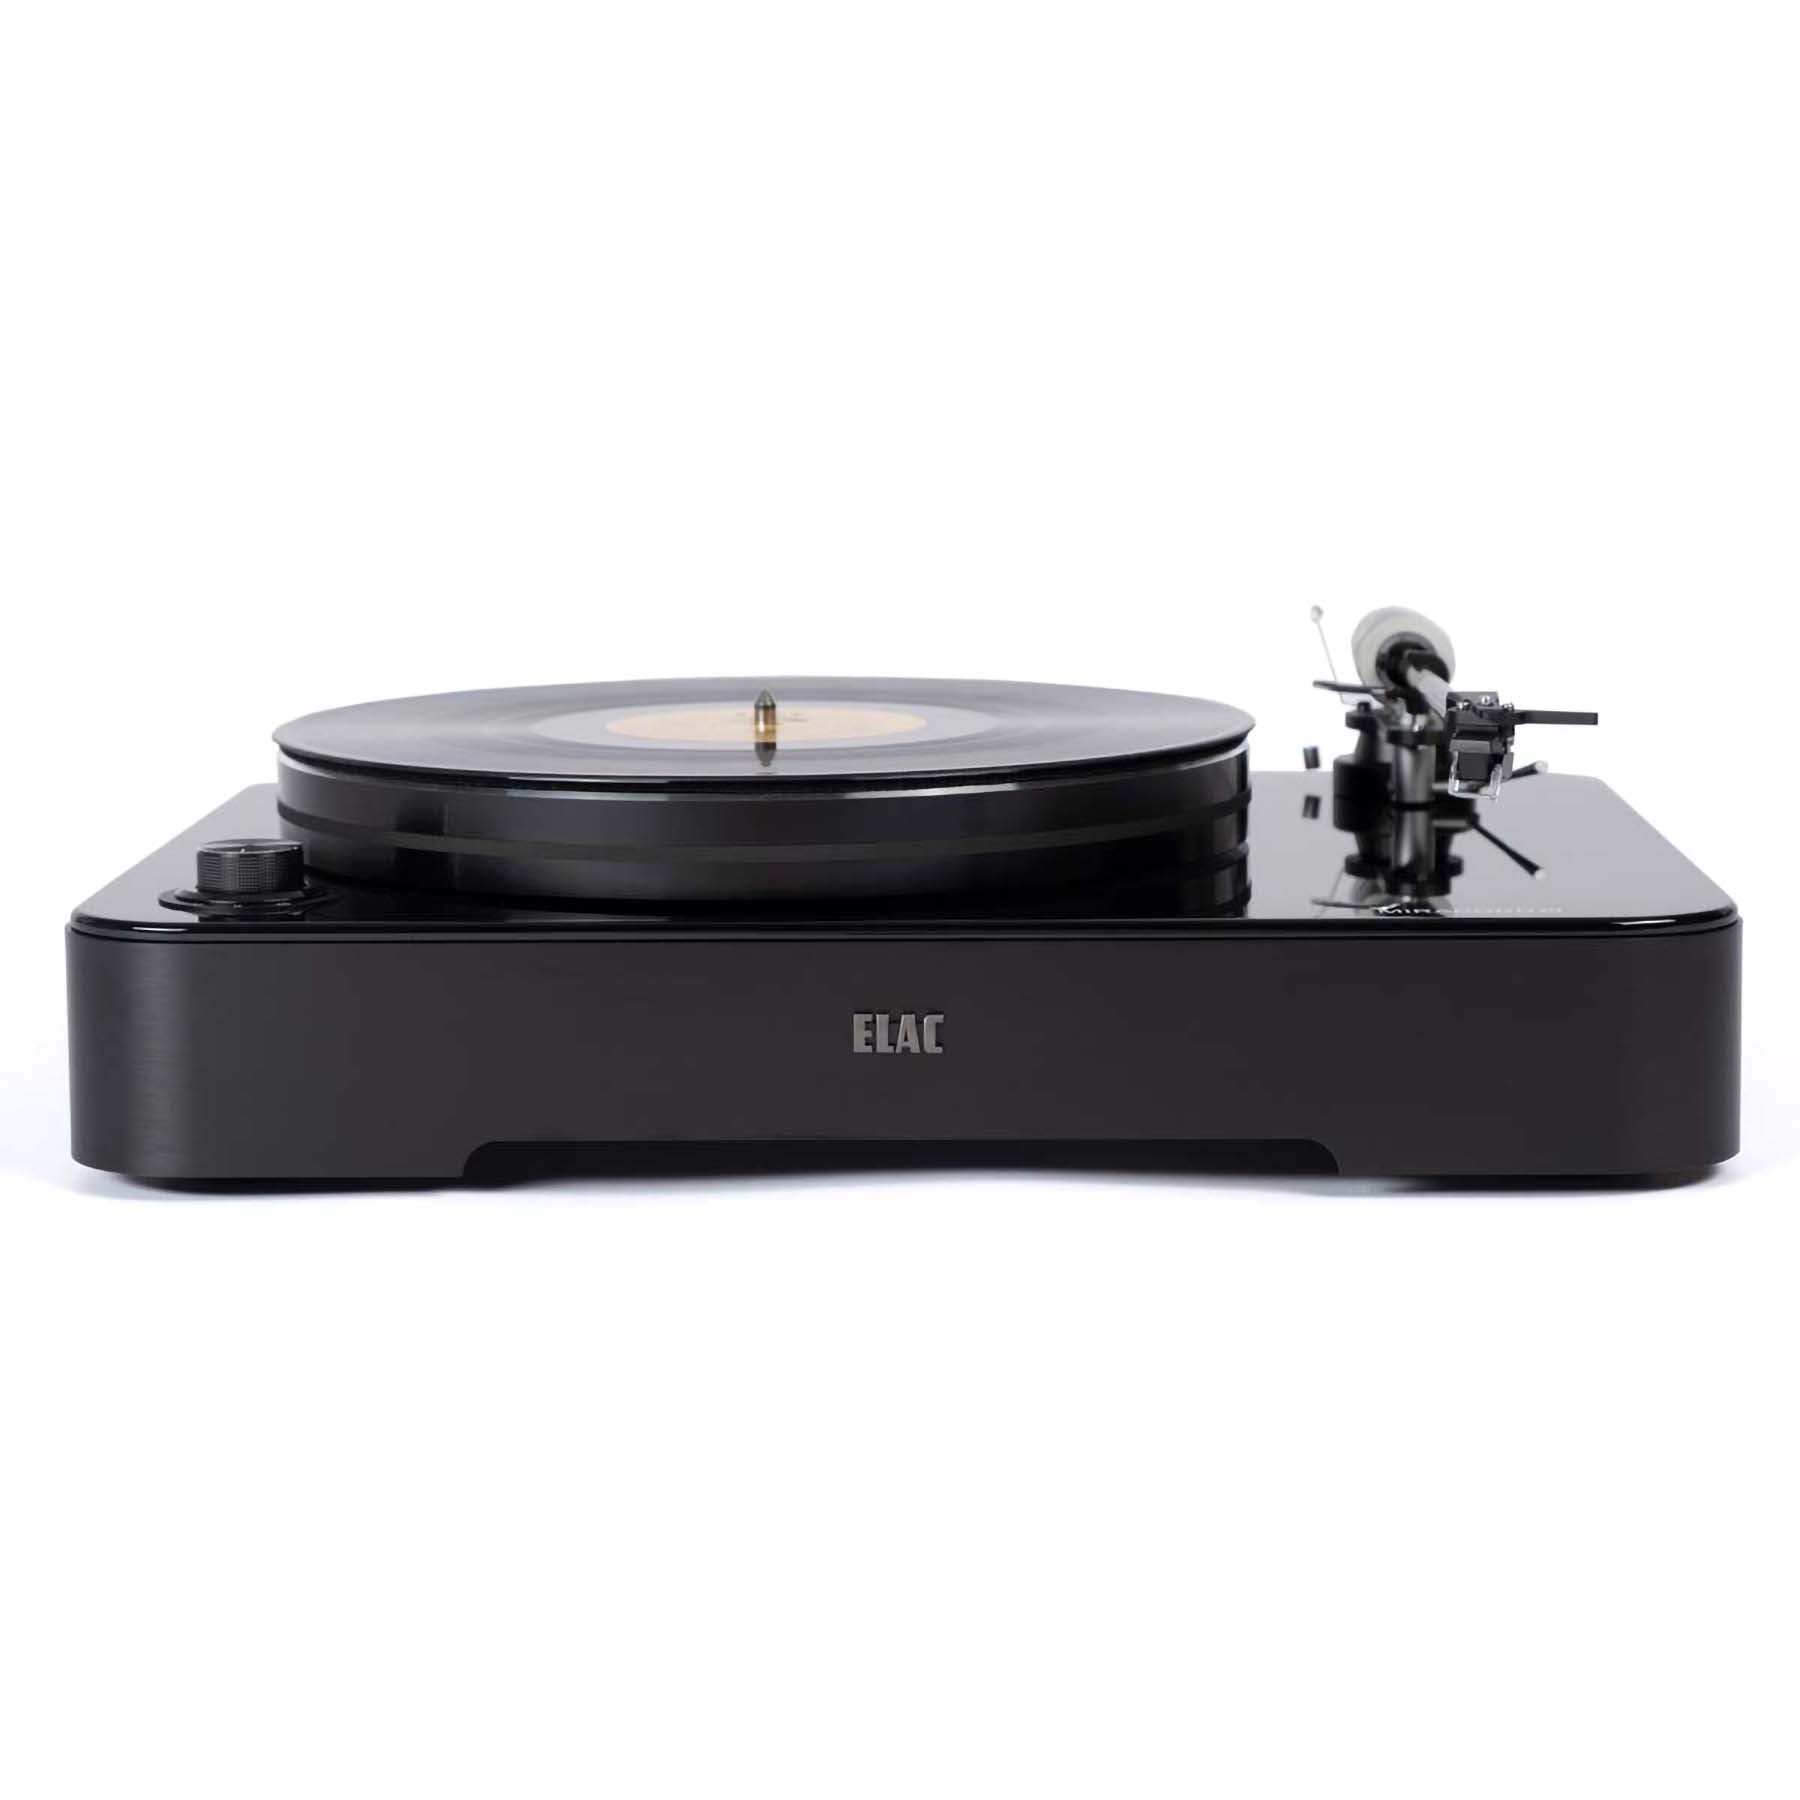 ELAC Miracord 80 Turntable